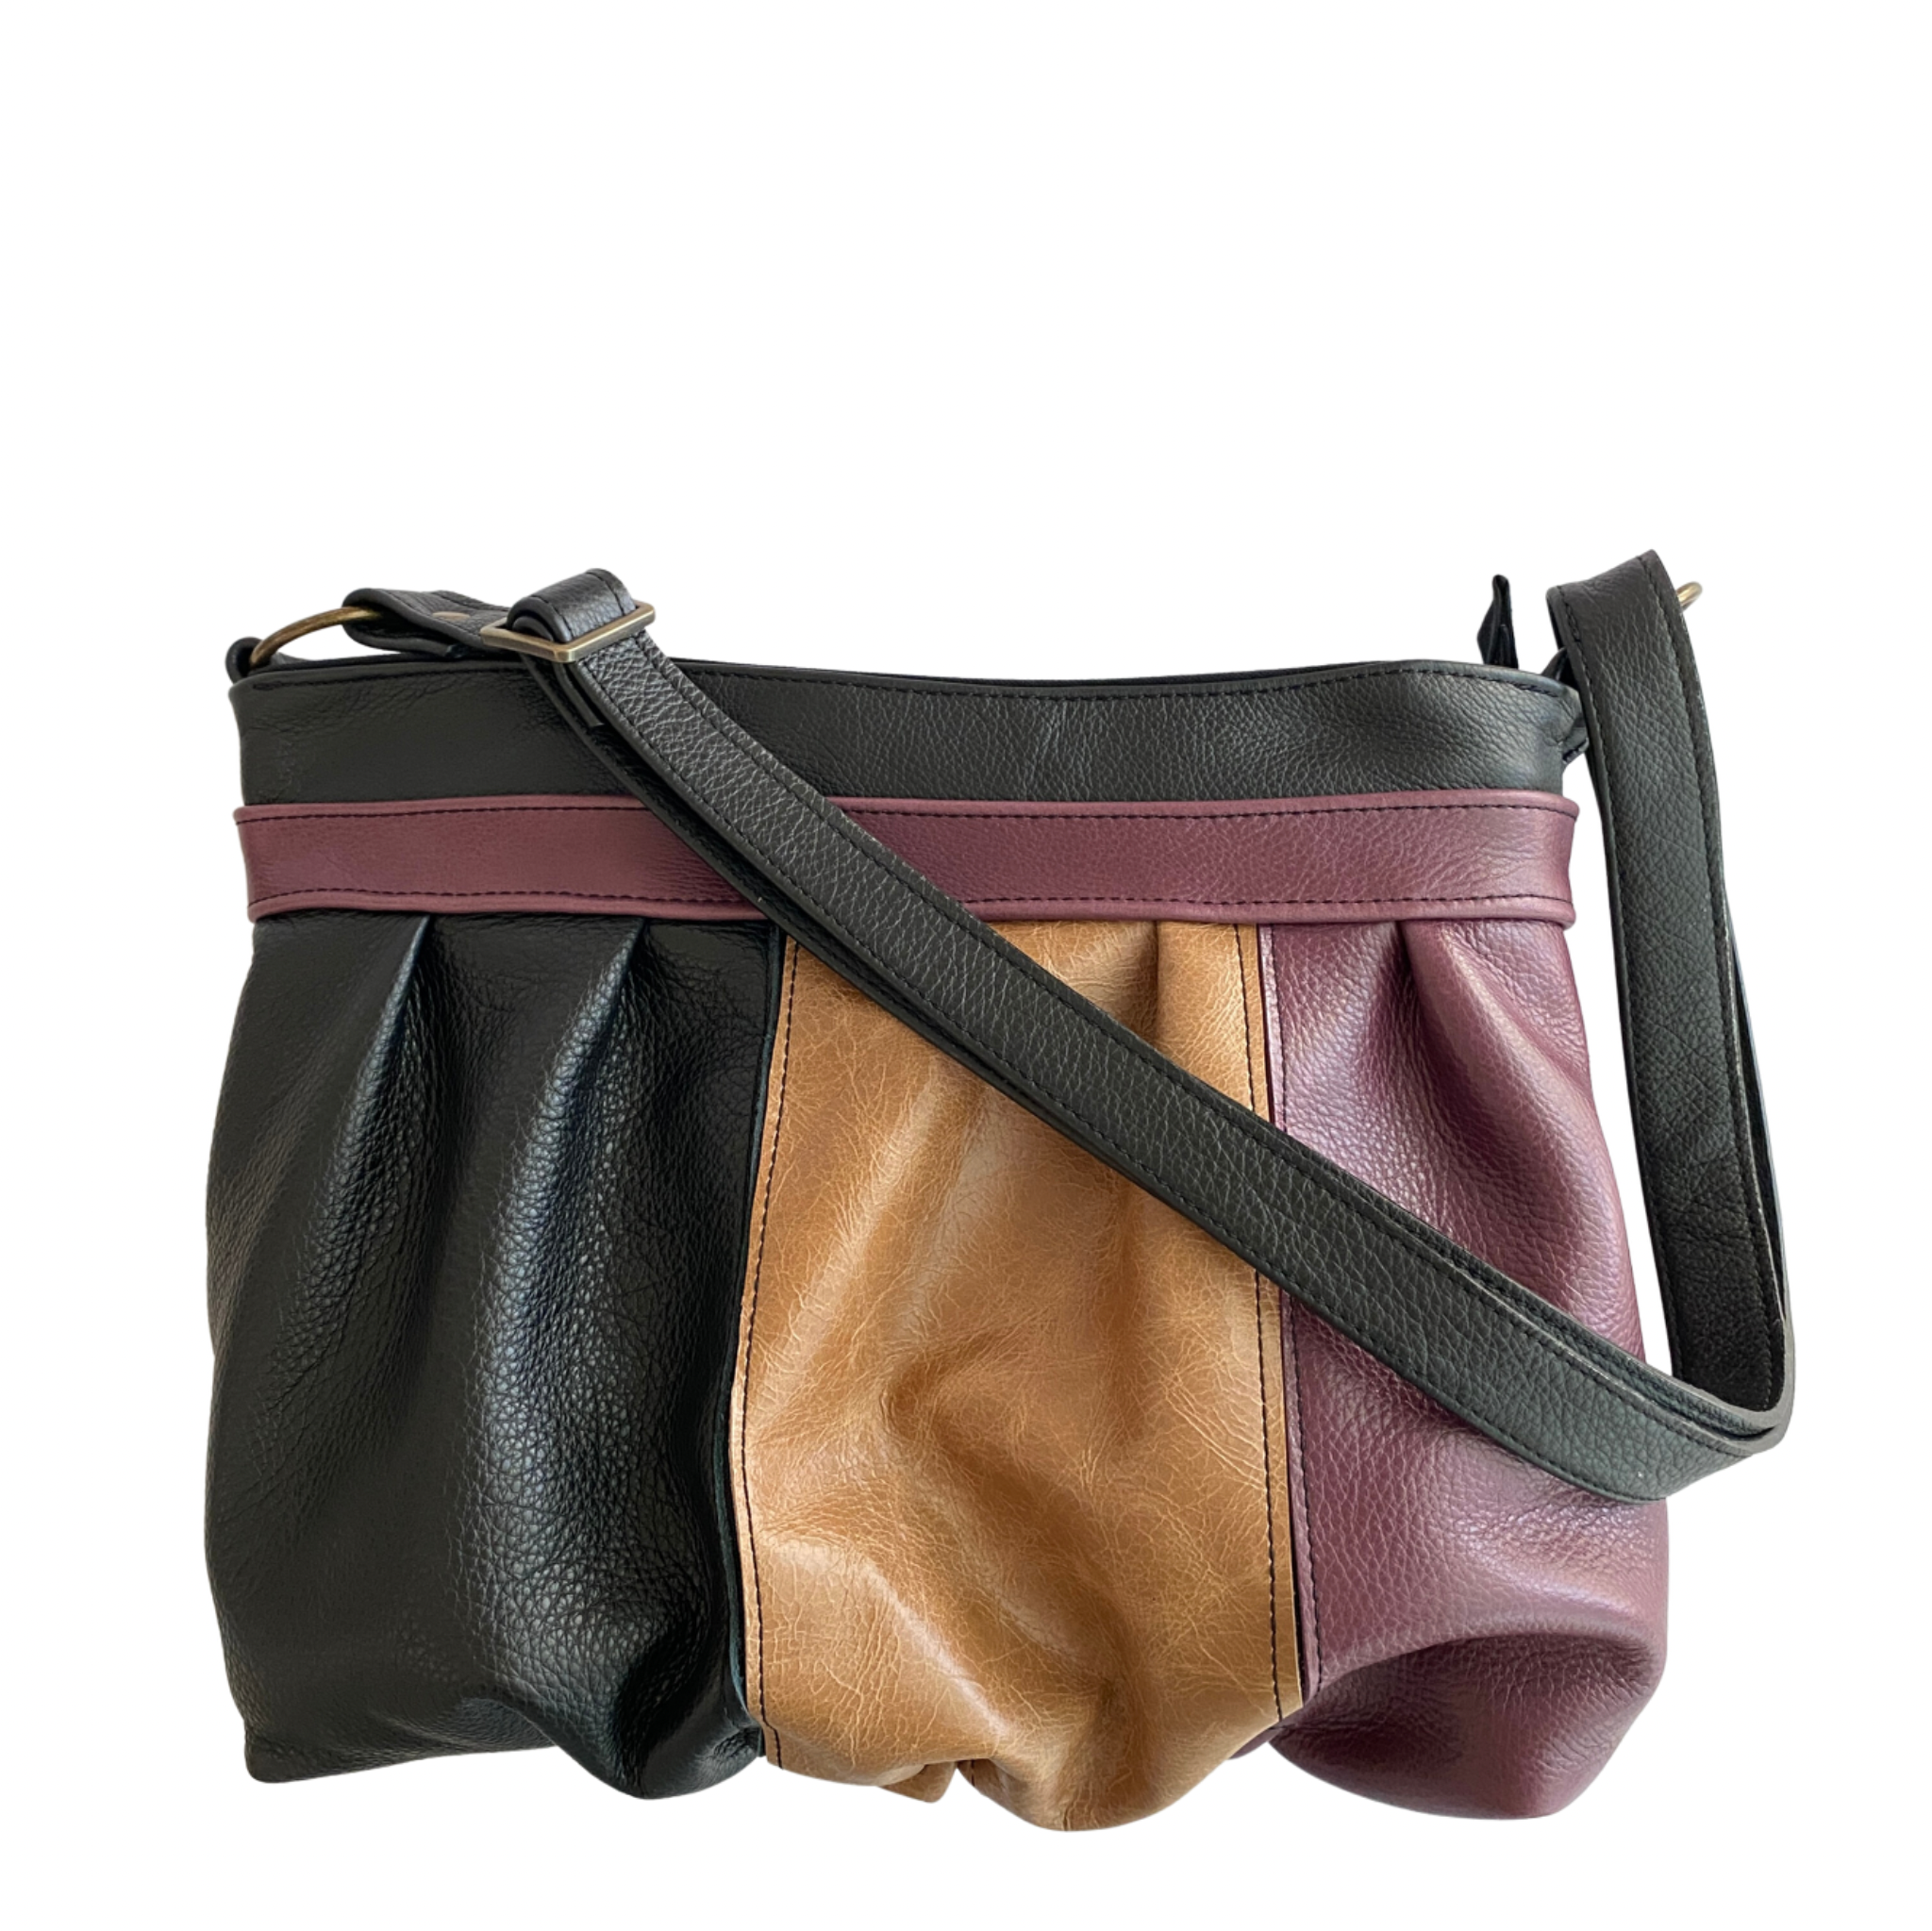 Ruche Mini in Patchwork Onyx, Almond, Mulberry, RTS (+ video)